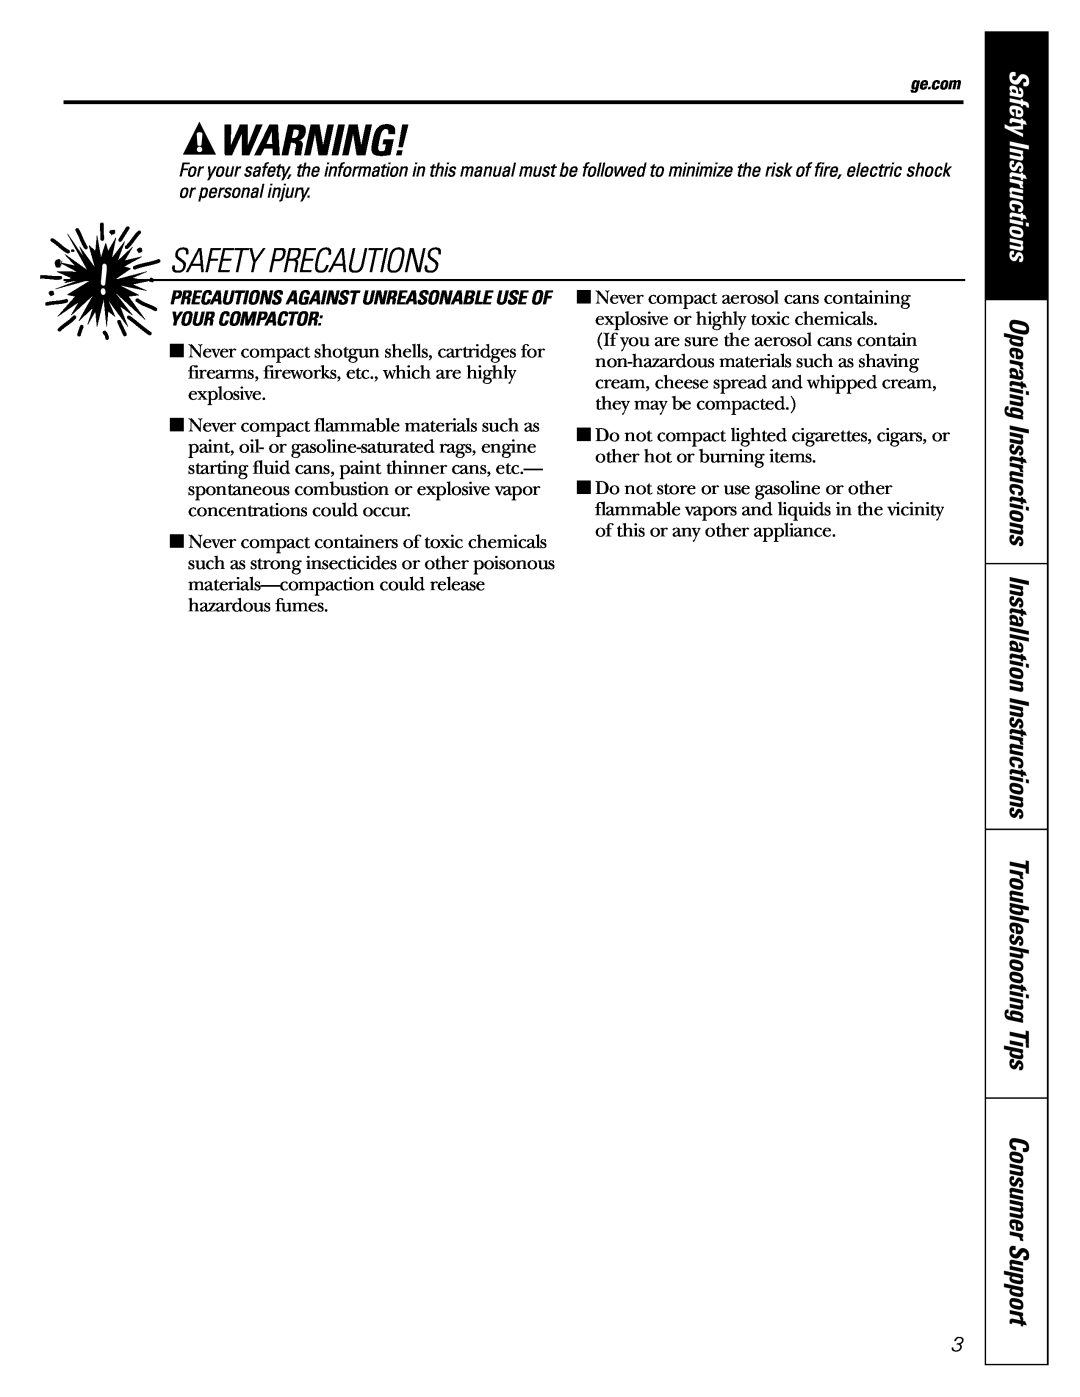 GE GCG1520 operating instructions Safety Precautions, Safety Instructions, ge.com 